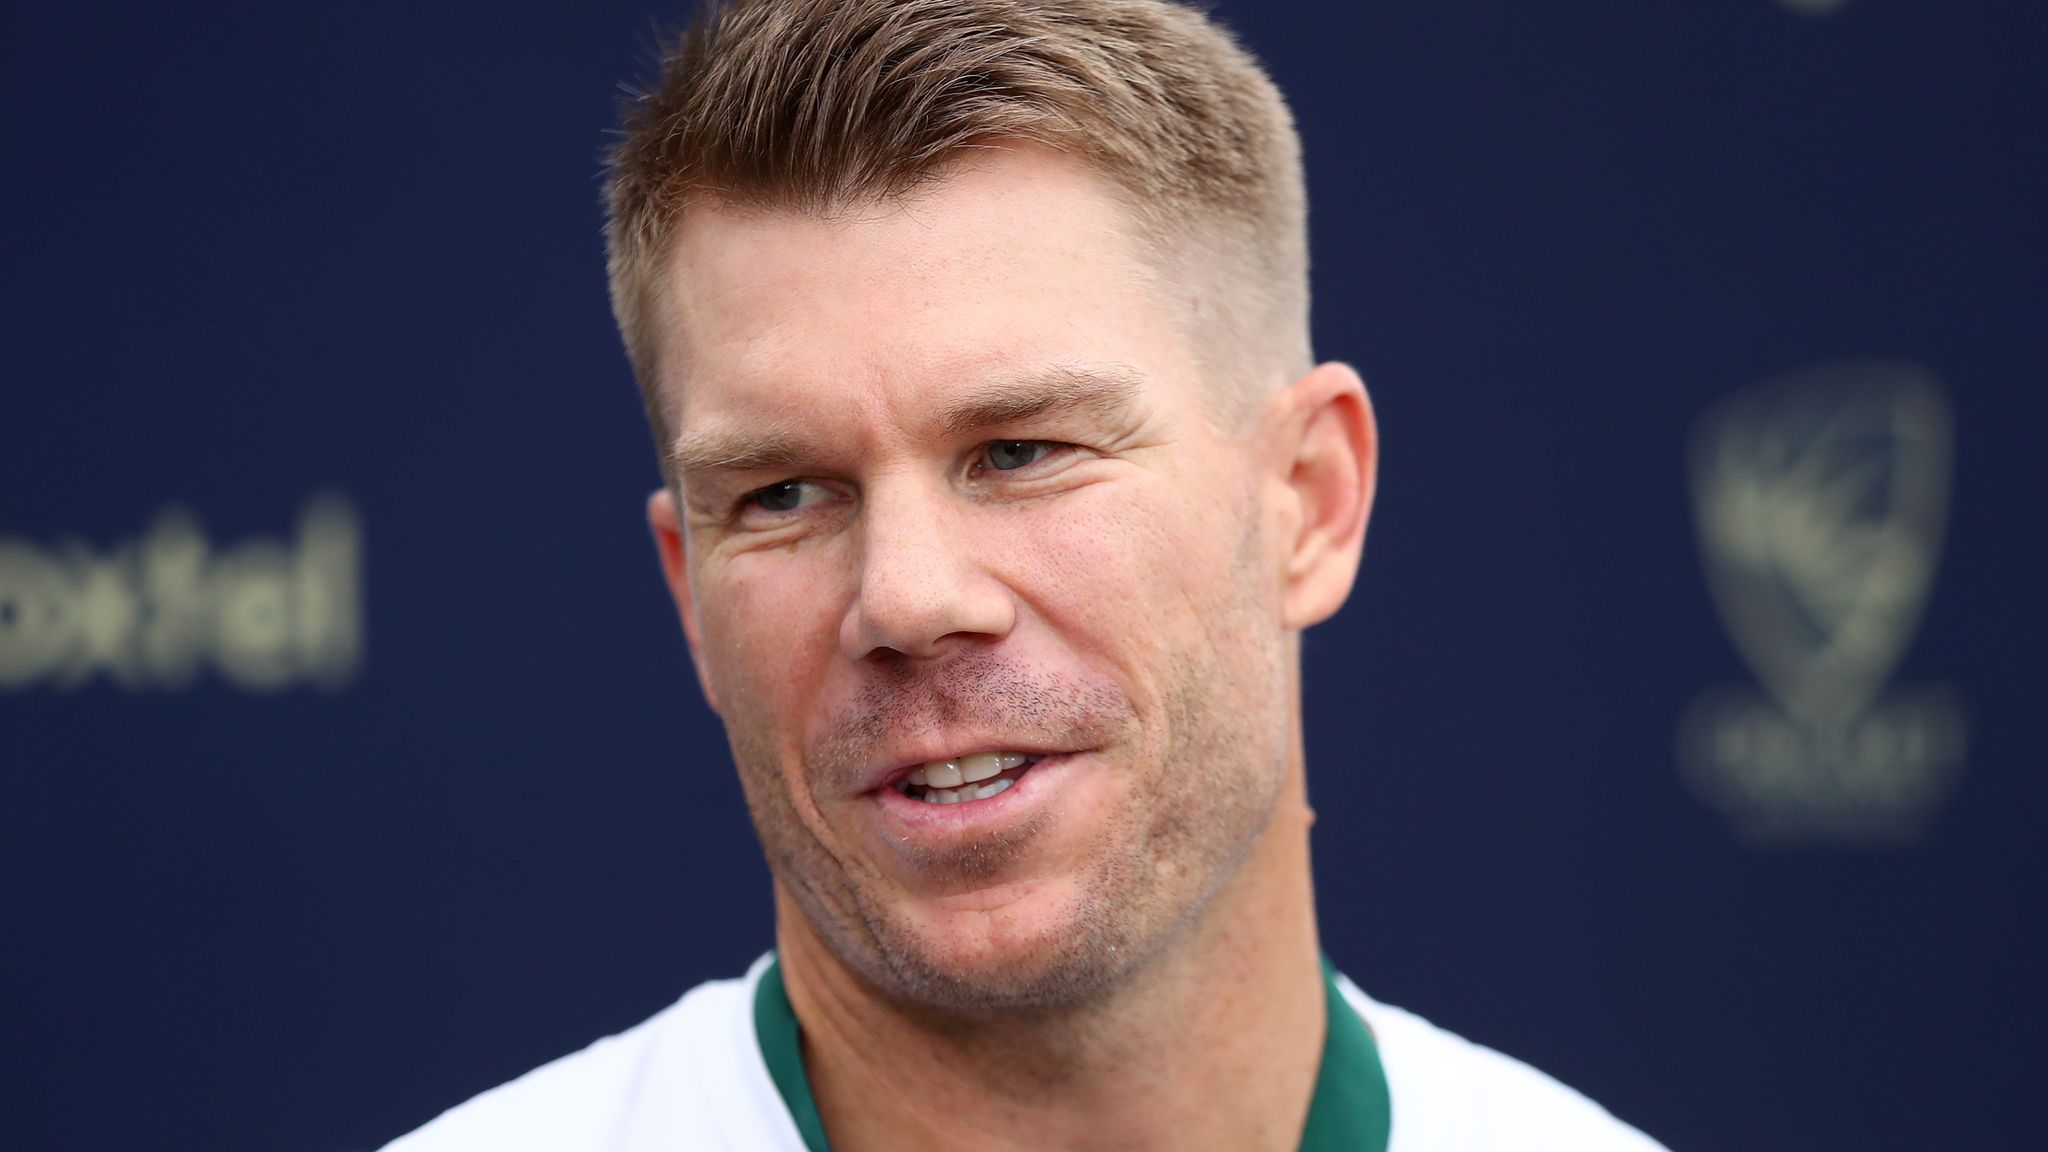 SEE: Warner, wife groove to Butta Bomma - Rediff.com